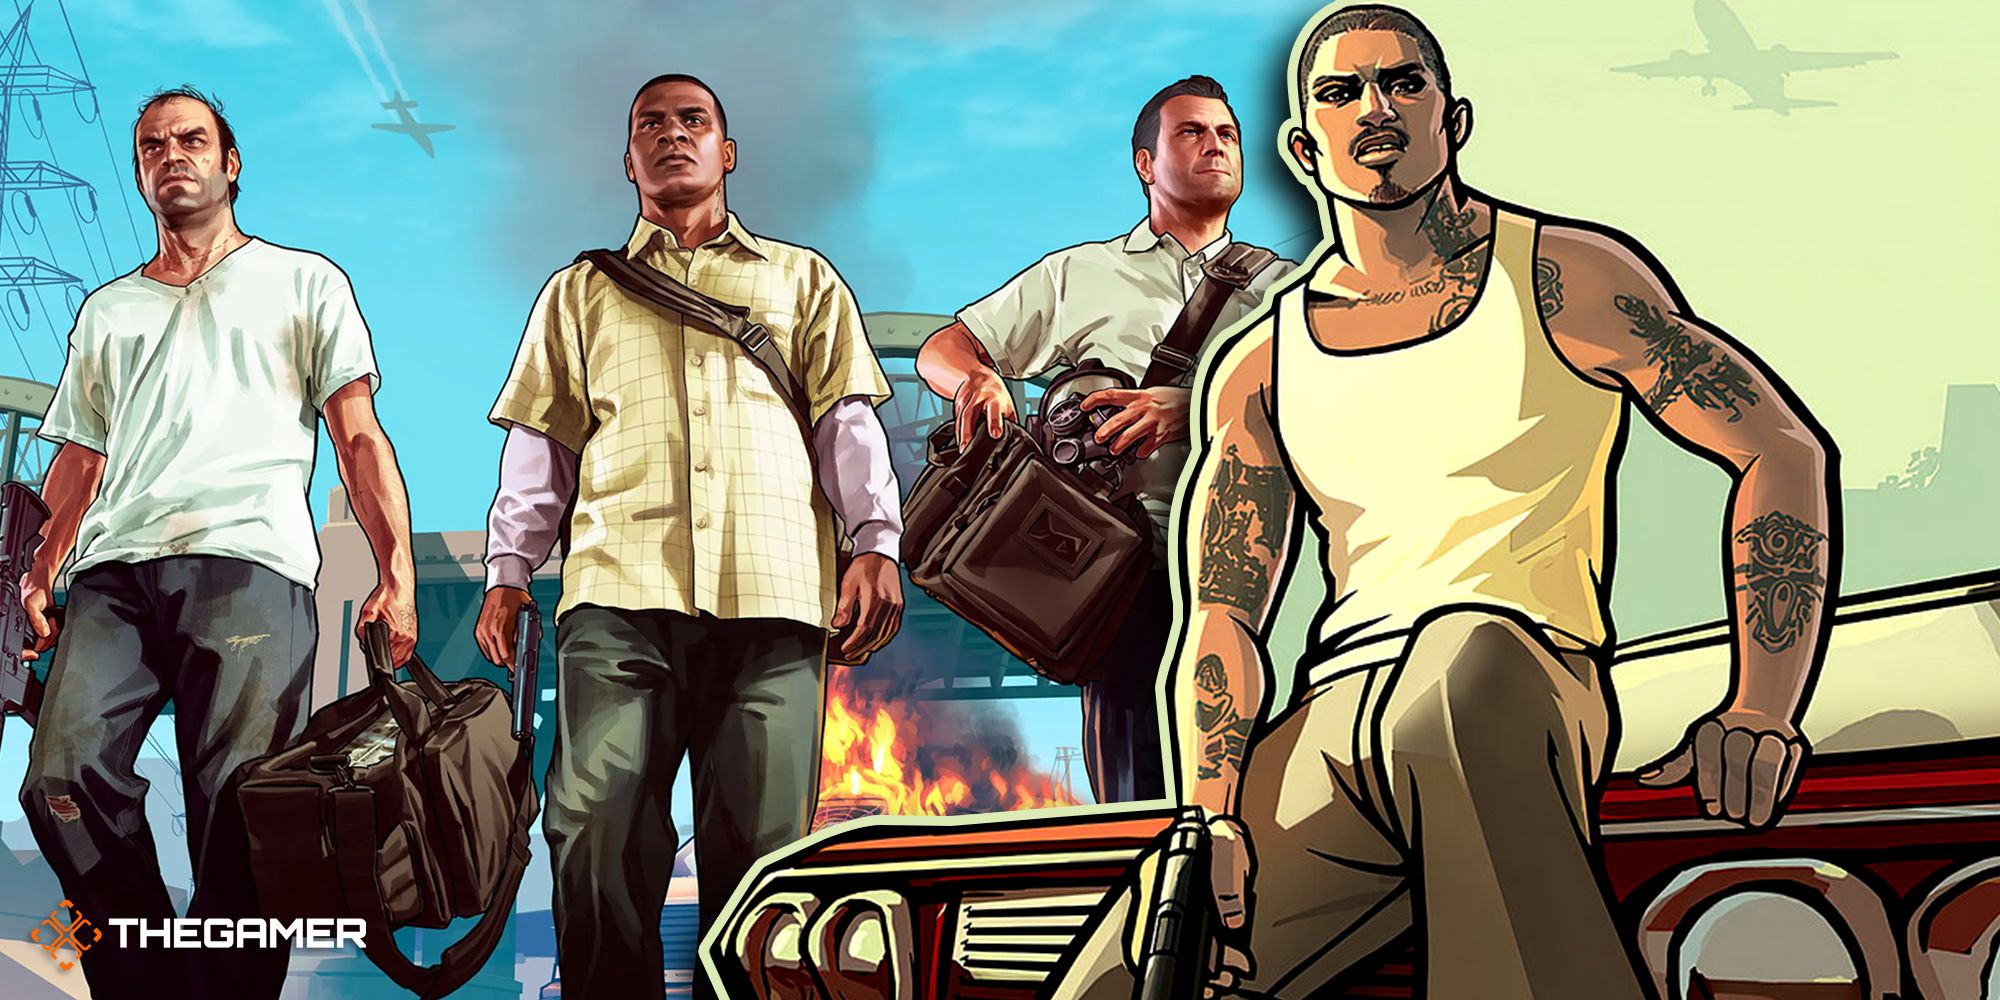 Is San Andreas Or GTA 5 Better?